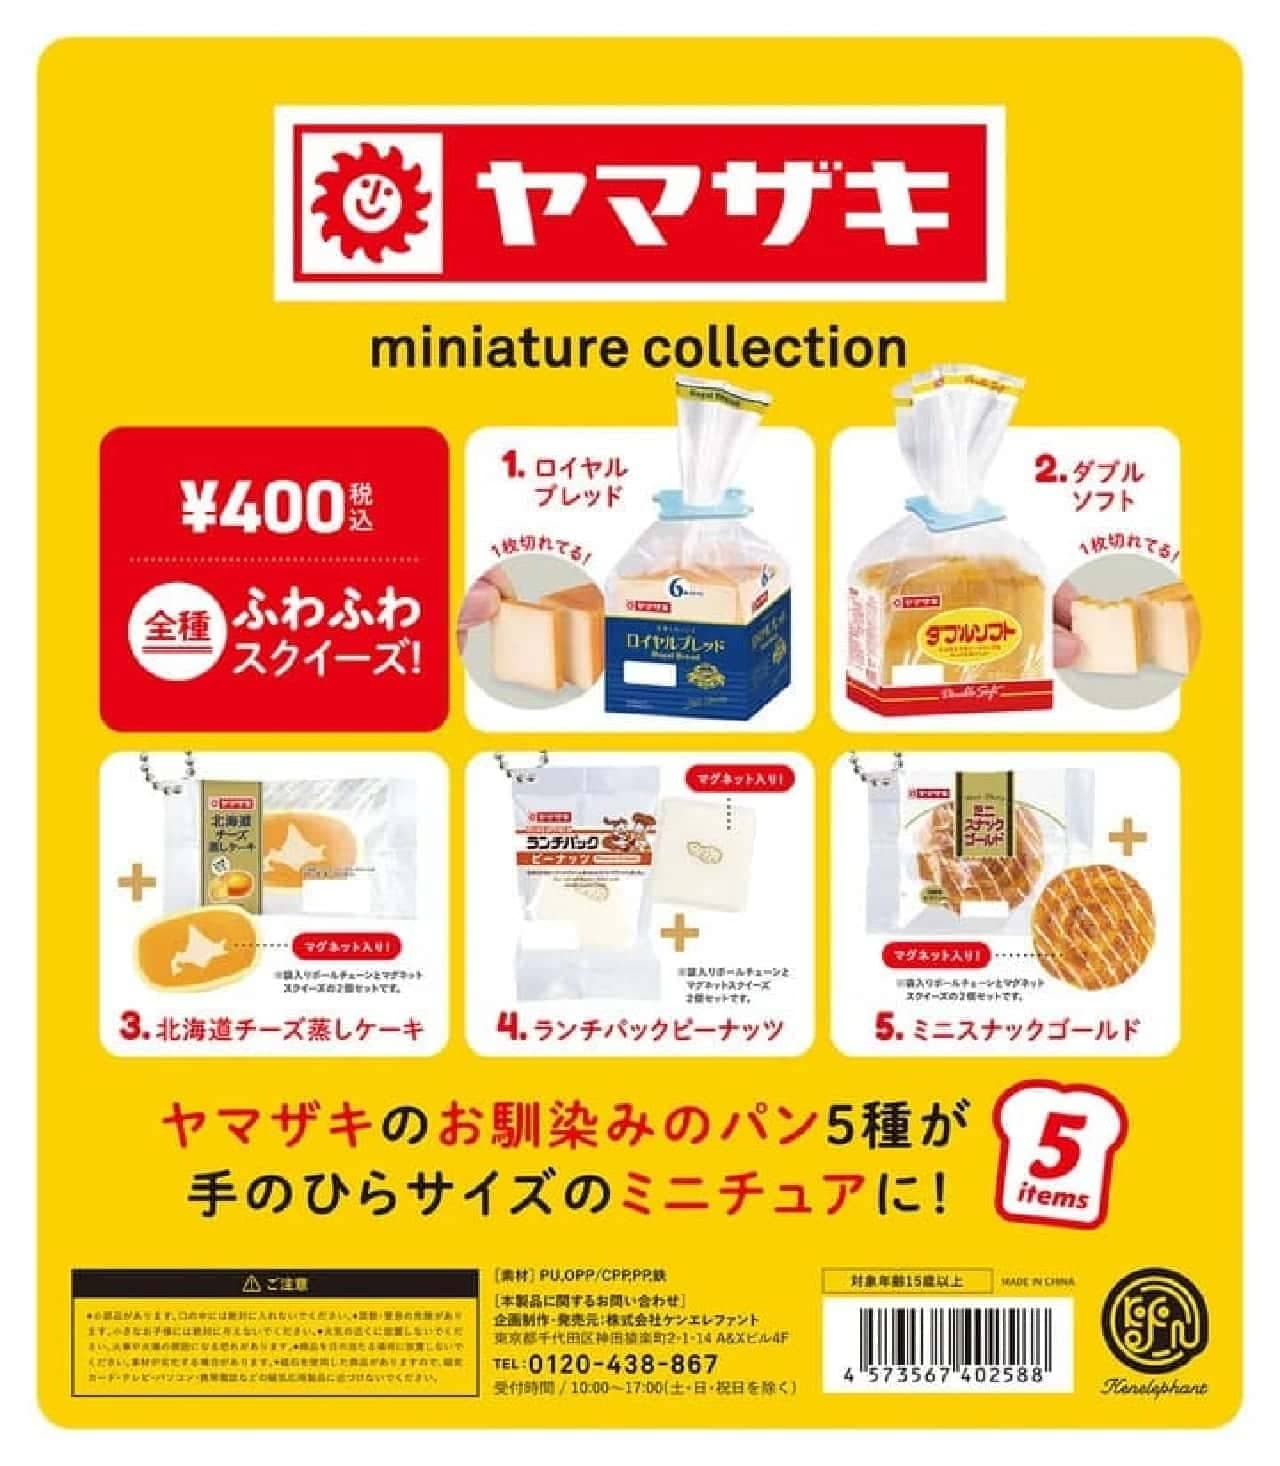 Introducing "Yamazaki Miniature Collection" --For fluffy squeeze such as Royal Bread Lunch Pack